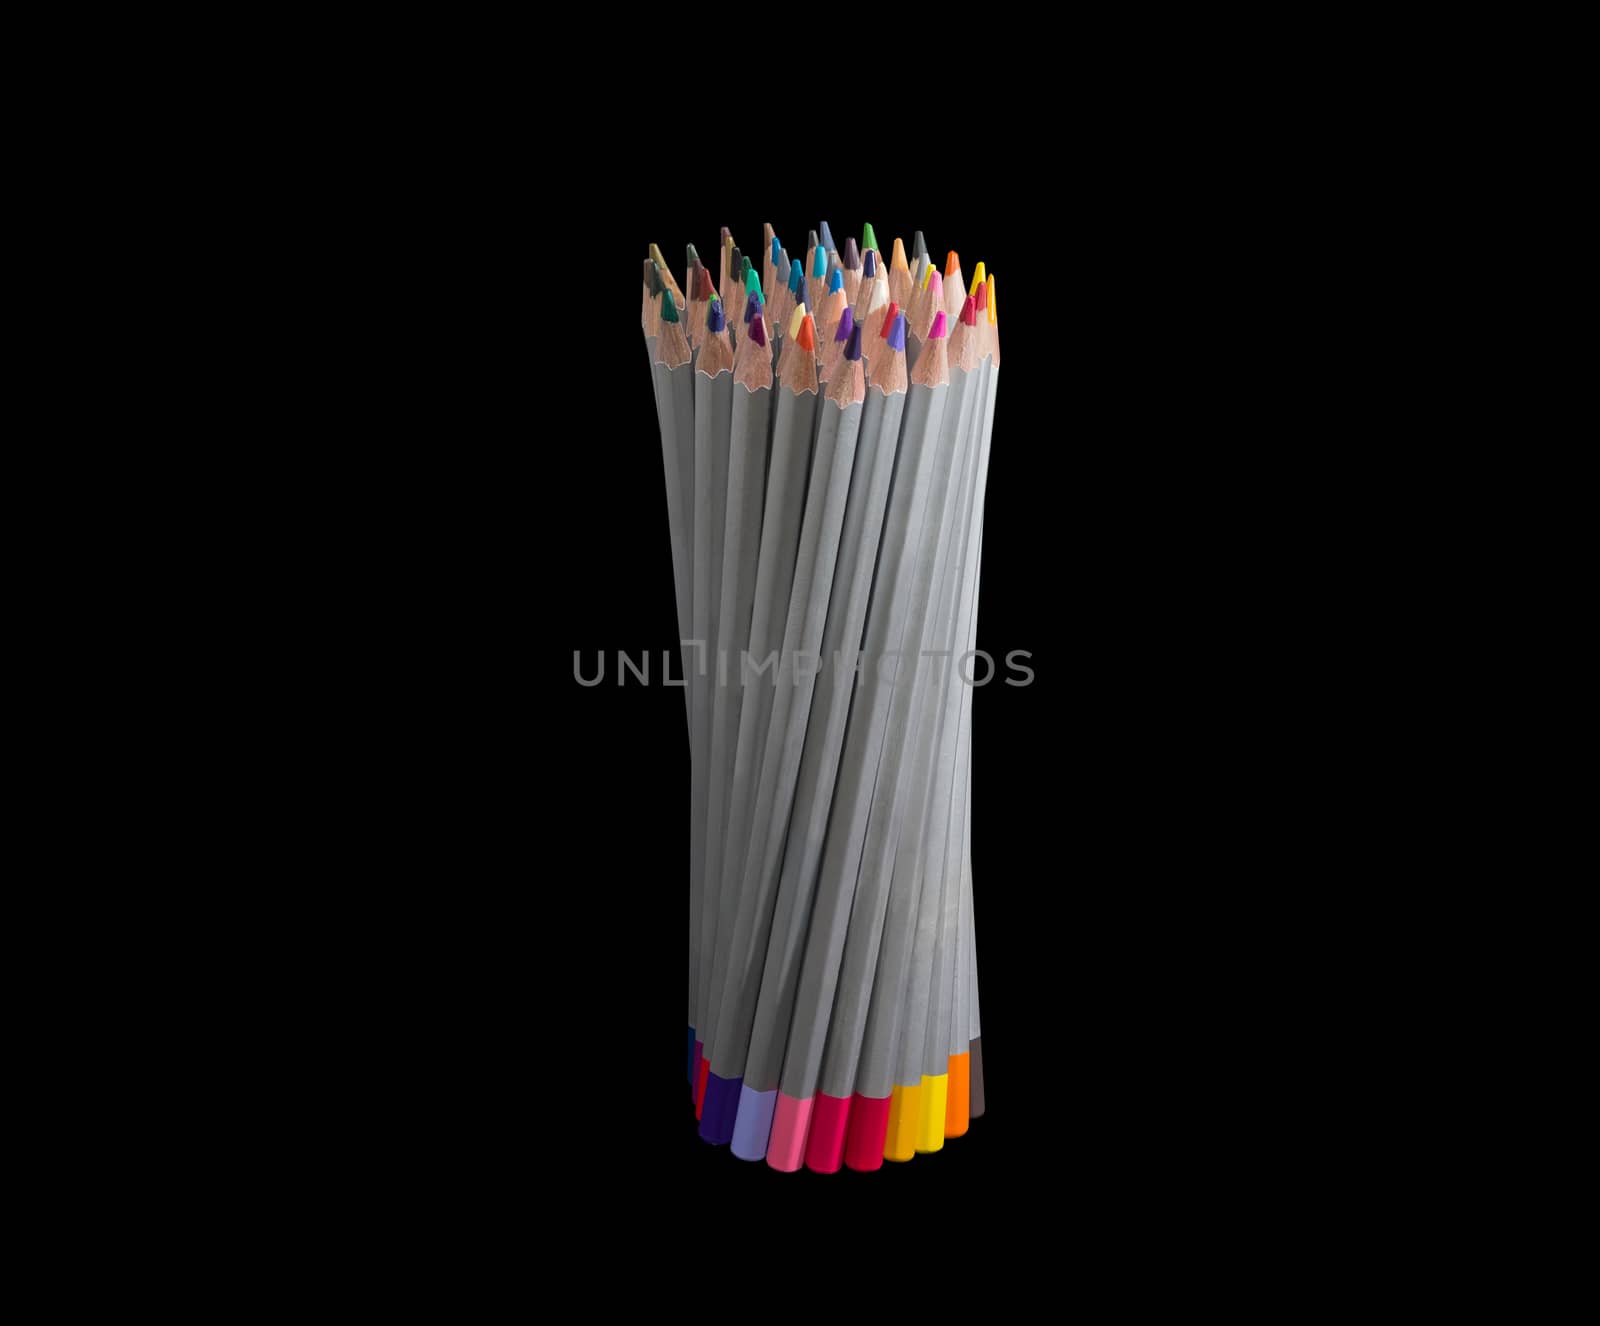 Bunch of colored pencils on a dark background by anmbph